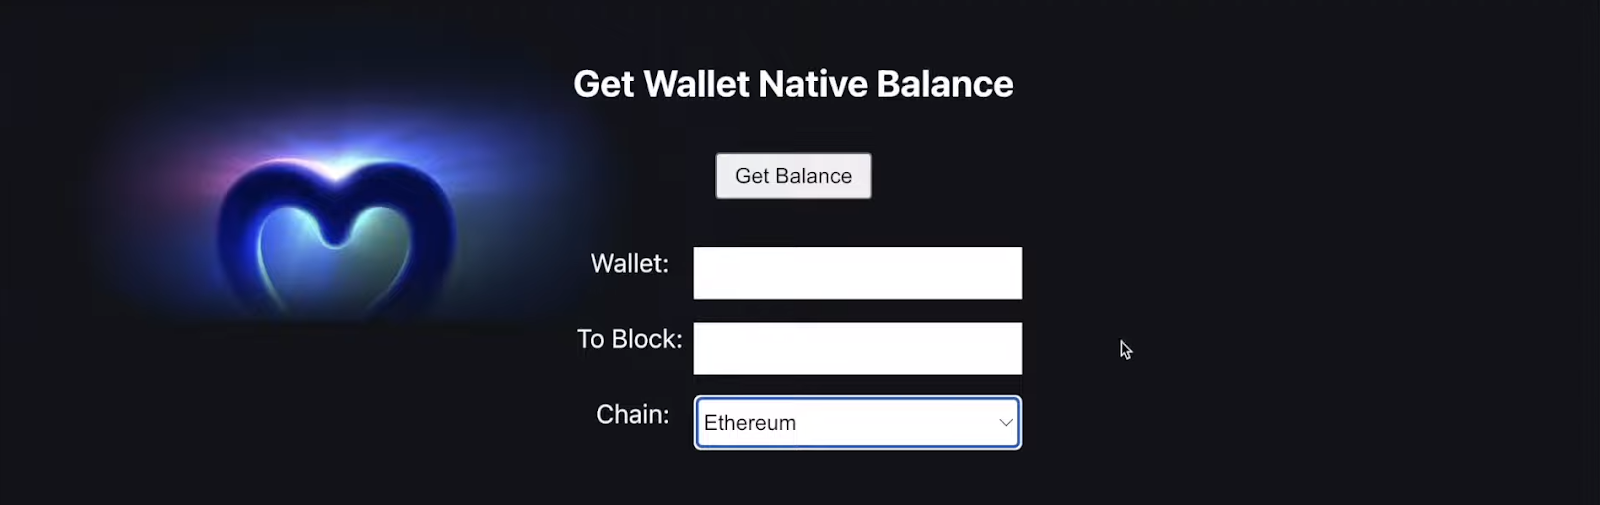 homepage of our dapp showing two input fields and the title that states get wallet native balance